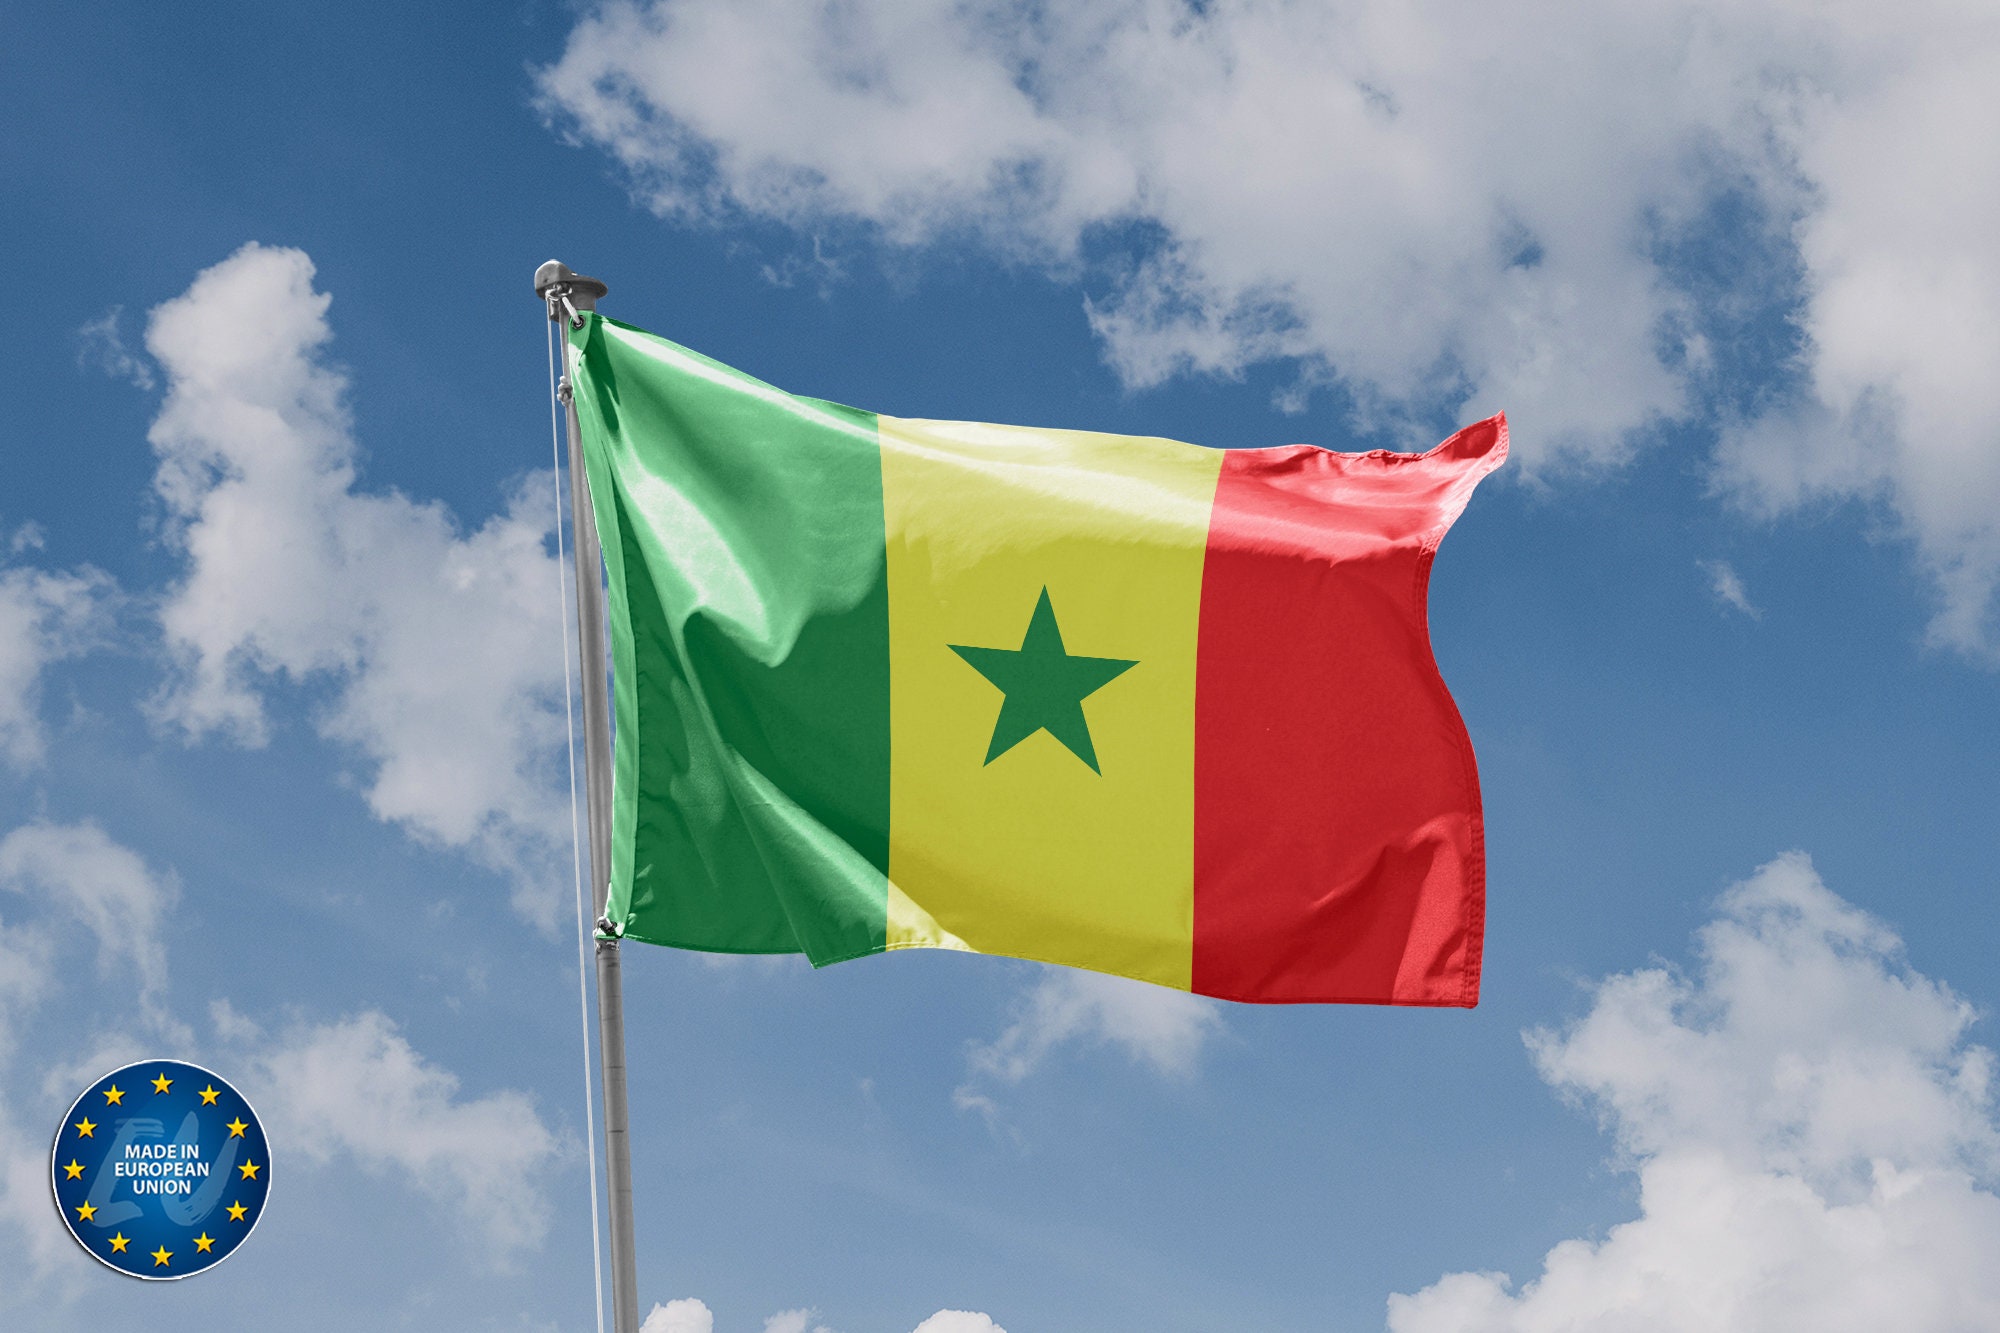 Buy Senegal flag - fast delivery guaranteed!